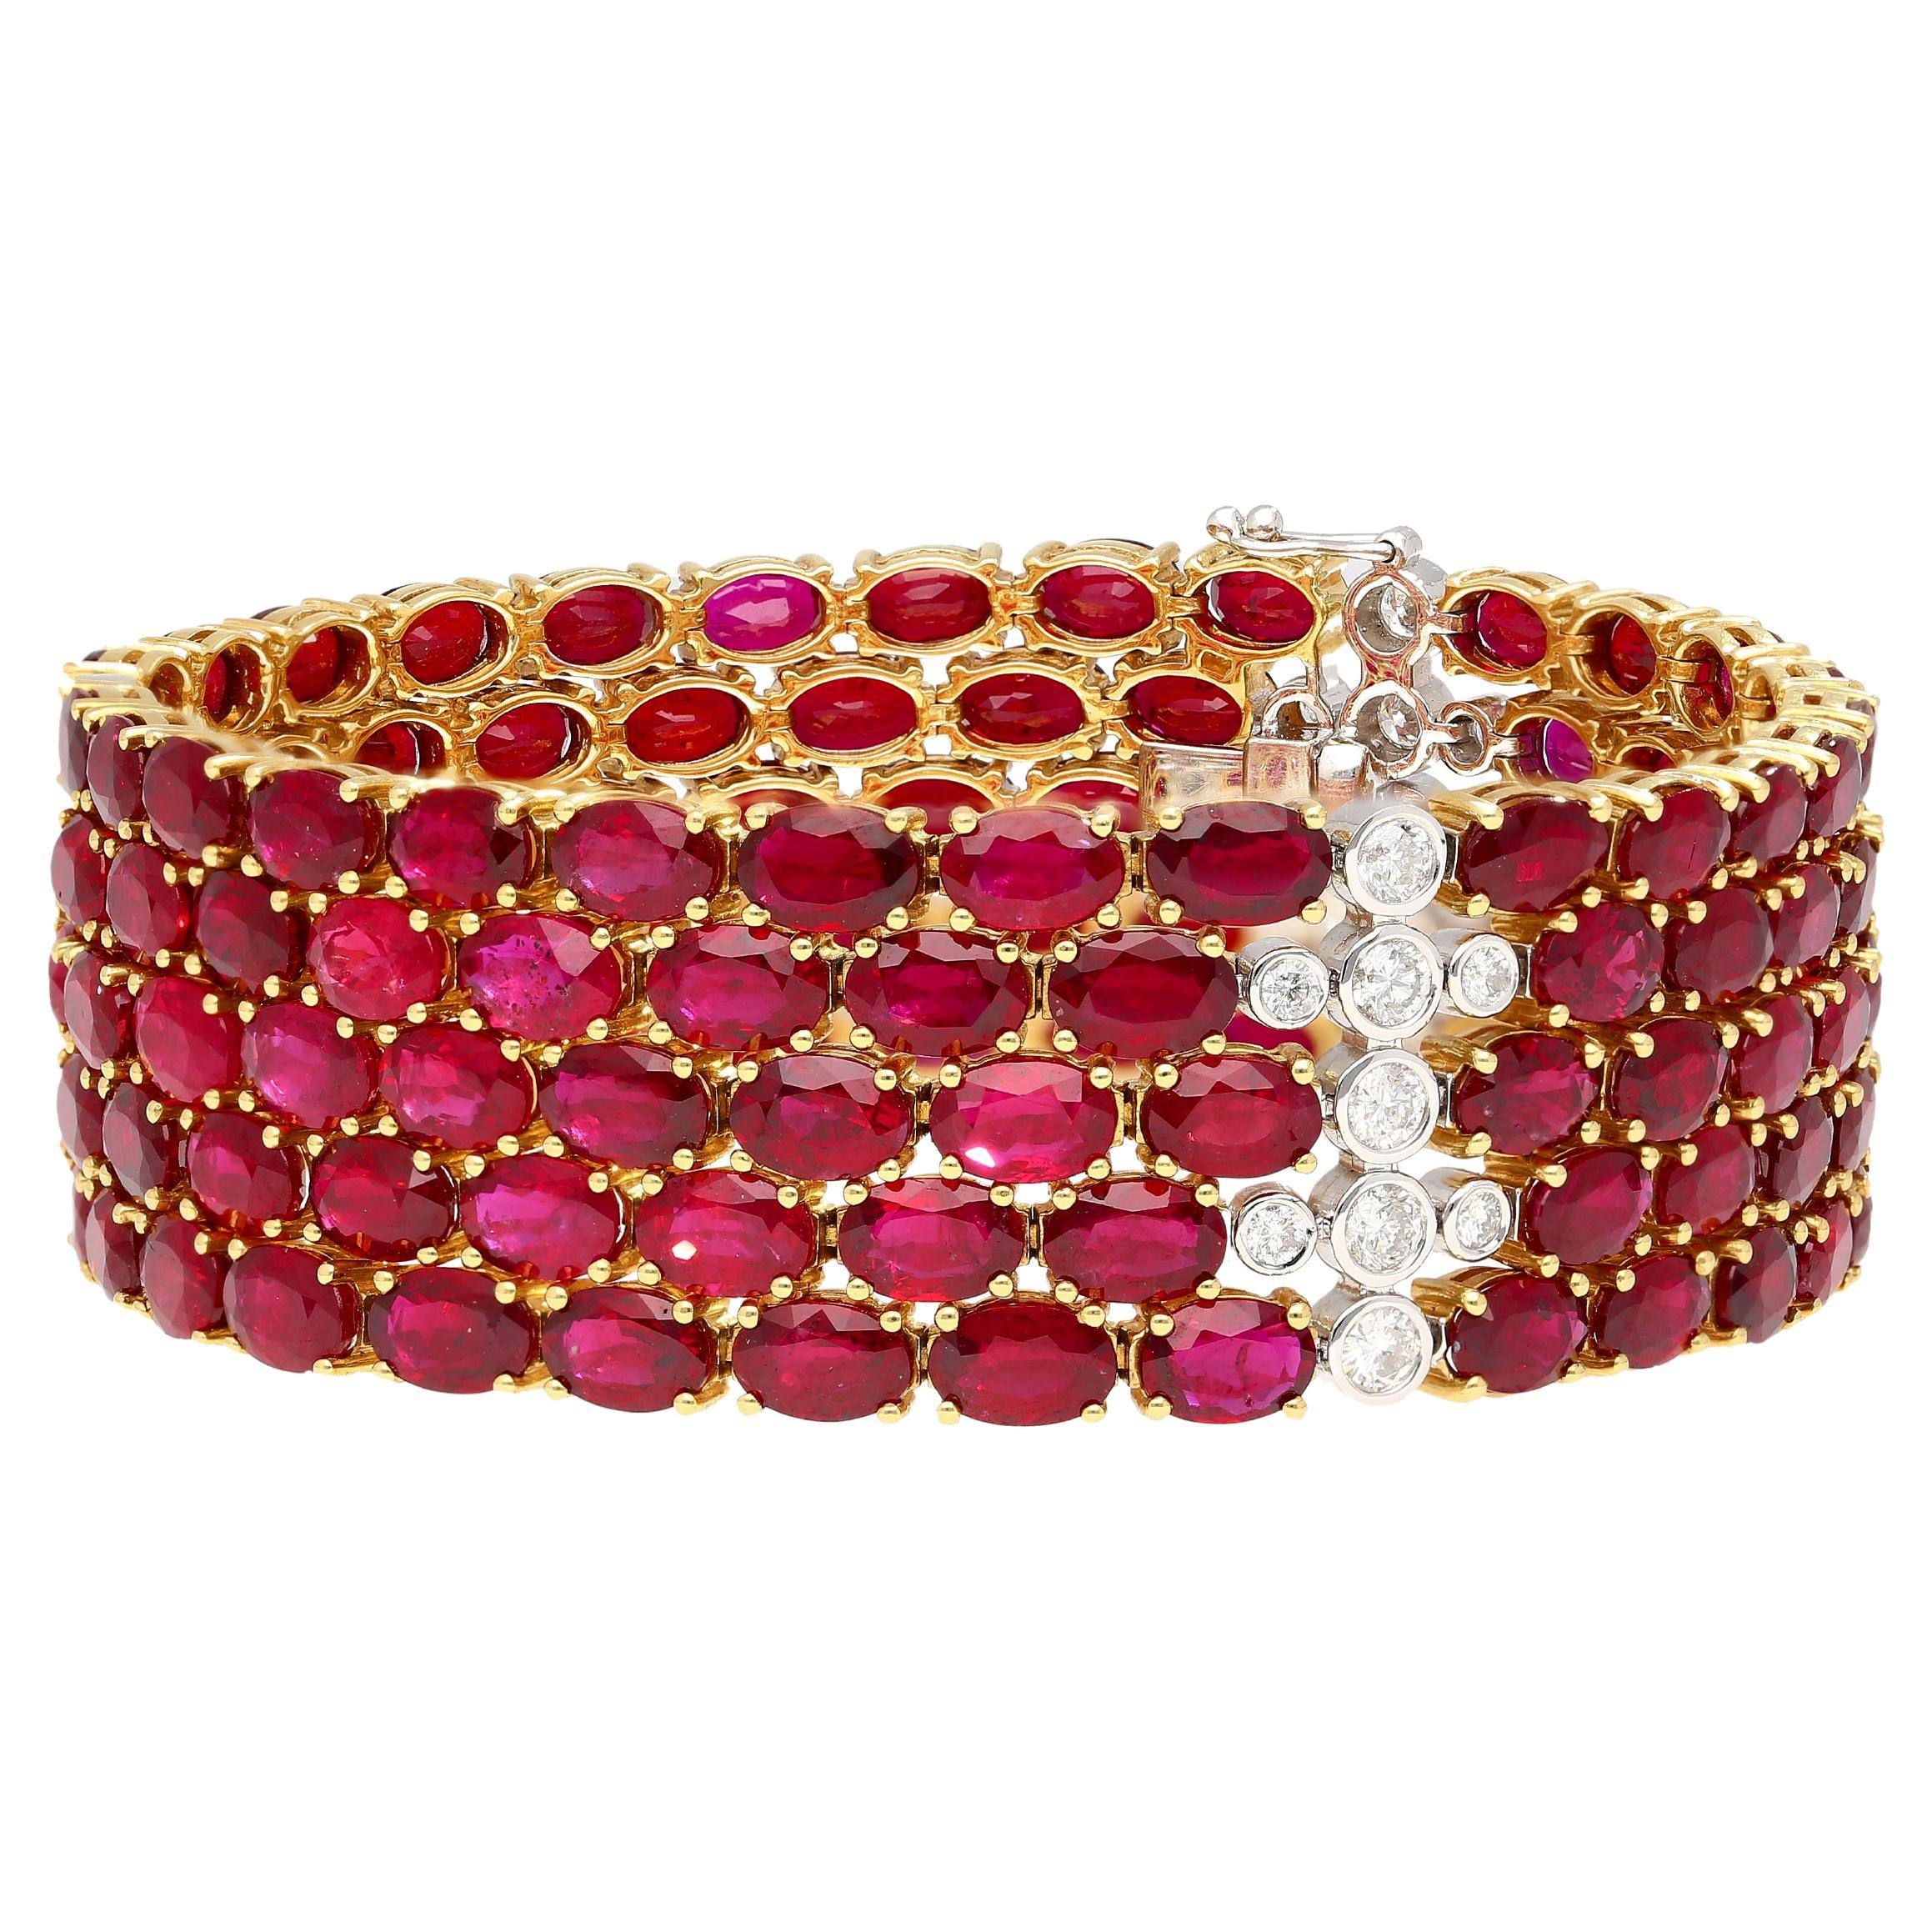 72.51 Carat Natural Oval Cut Ruby and Diamond 5-Row Multi Link 18K Gold Bracelet For Sale